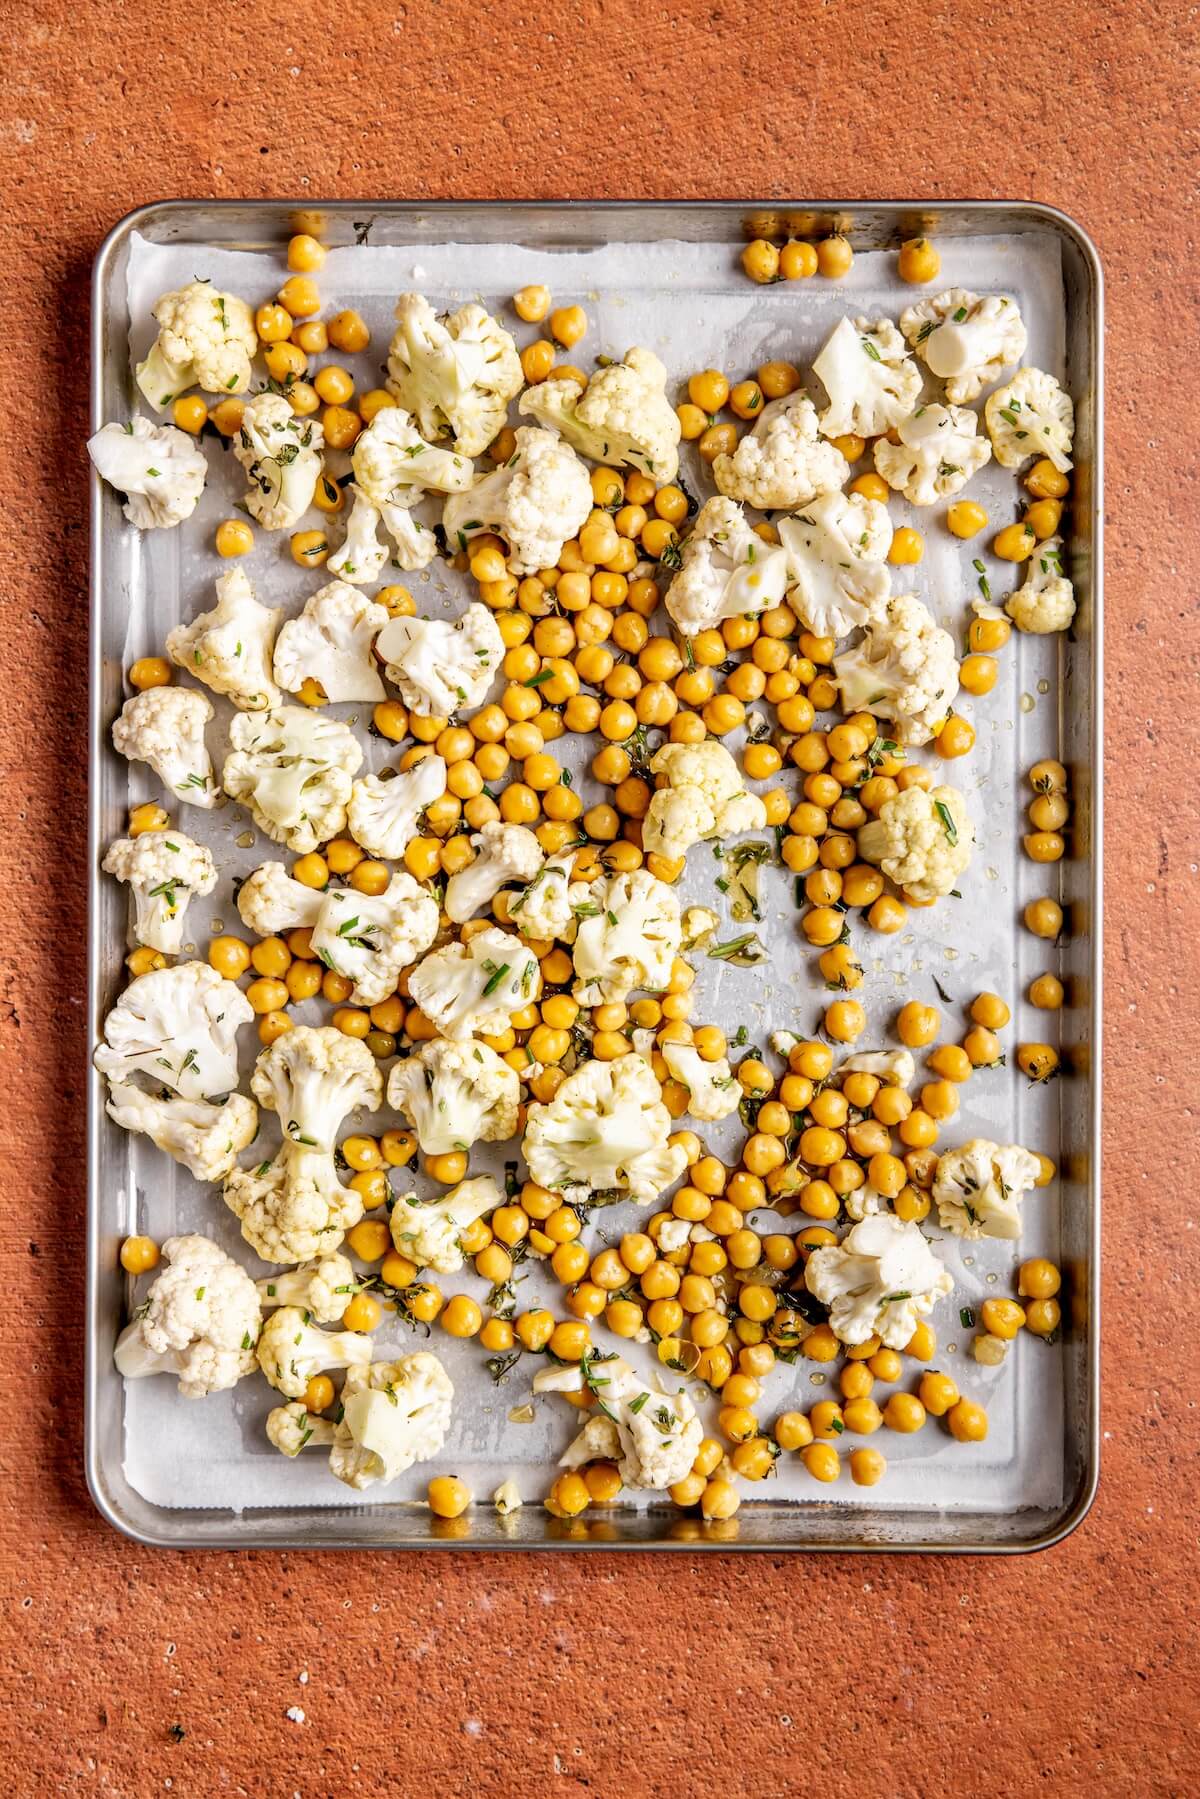 Herb and Maple Roasted Cauliflower with Chickpeas Step 2 - Olivia Adriance